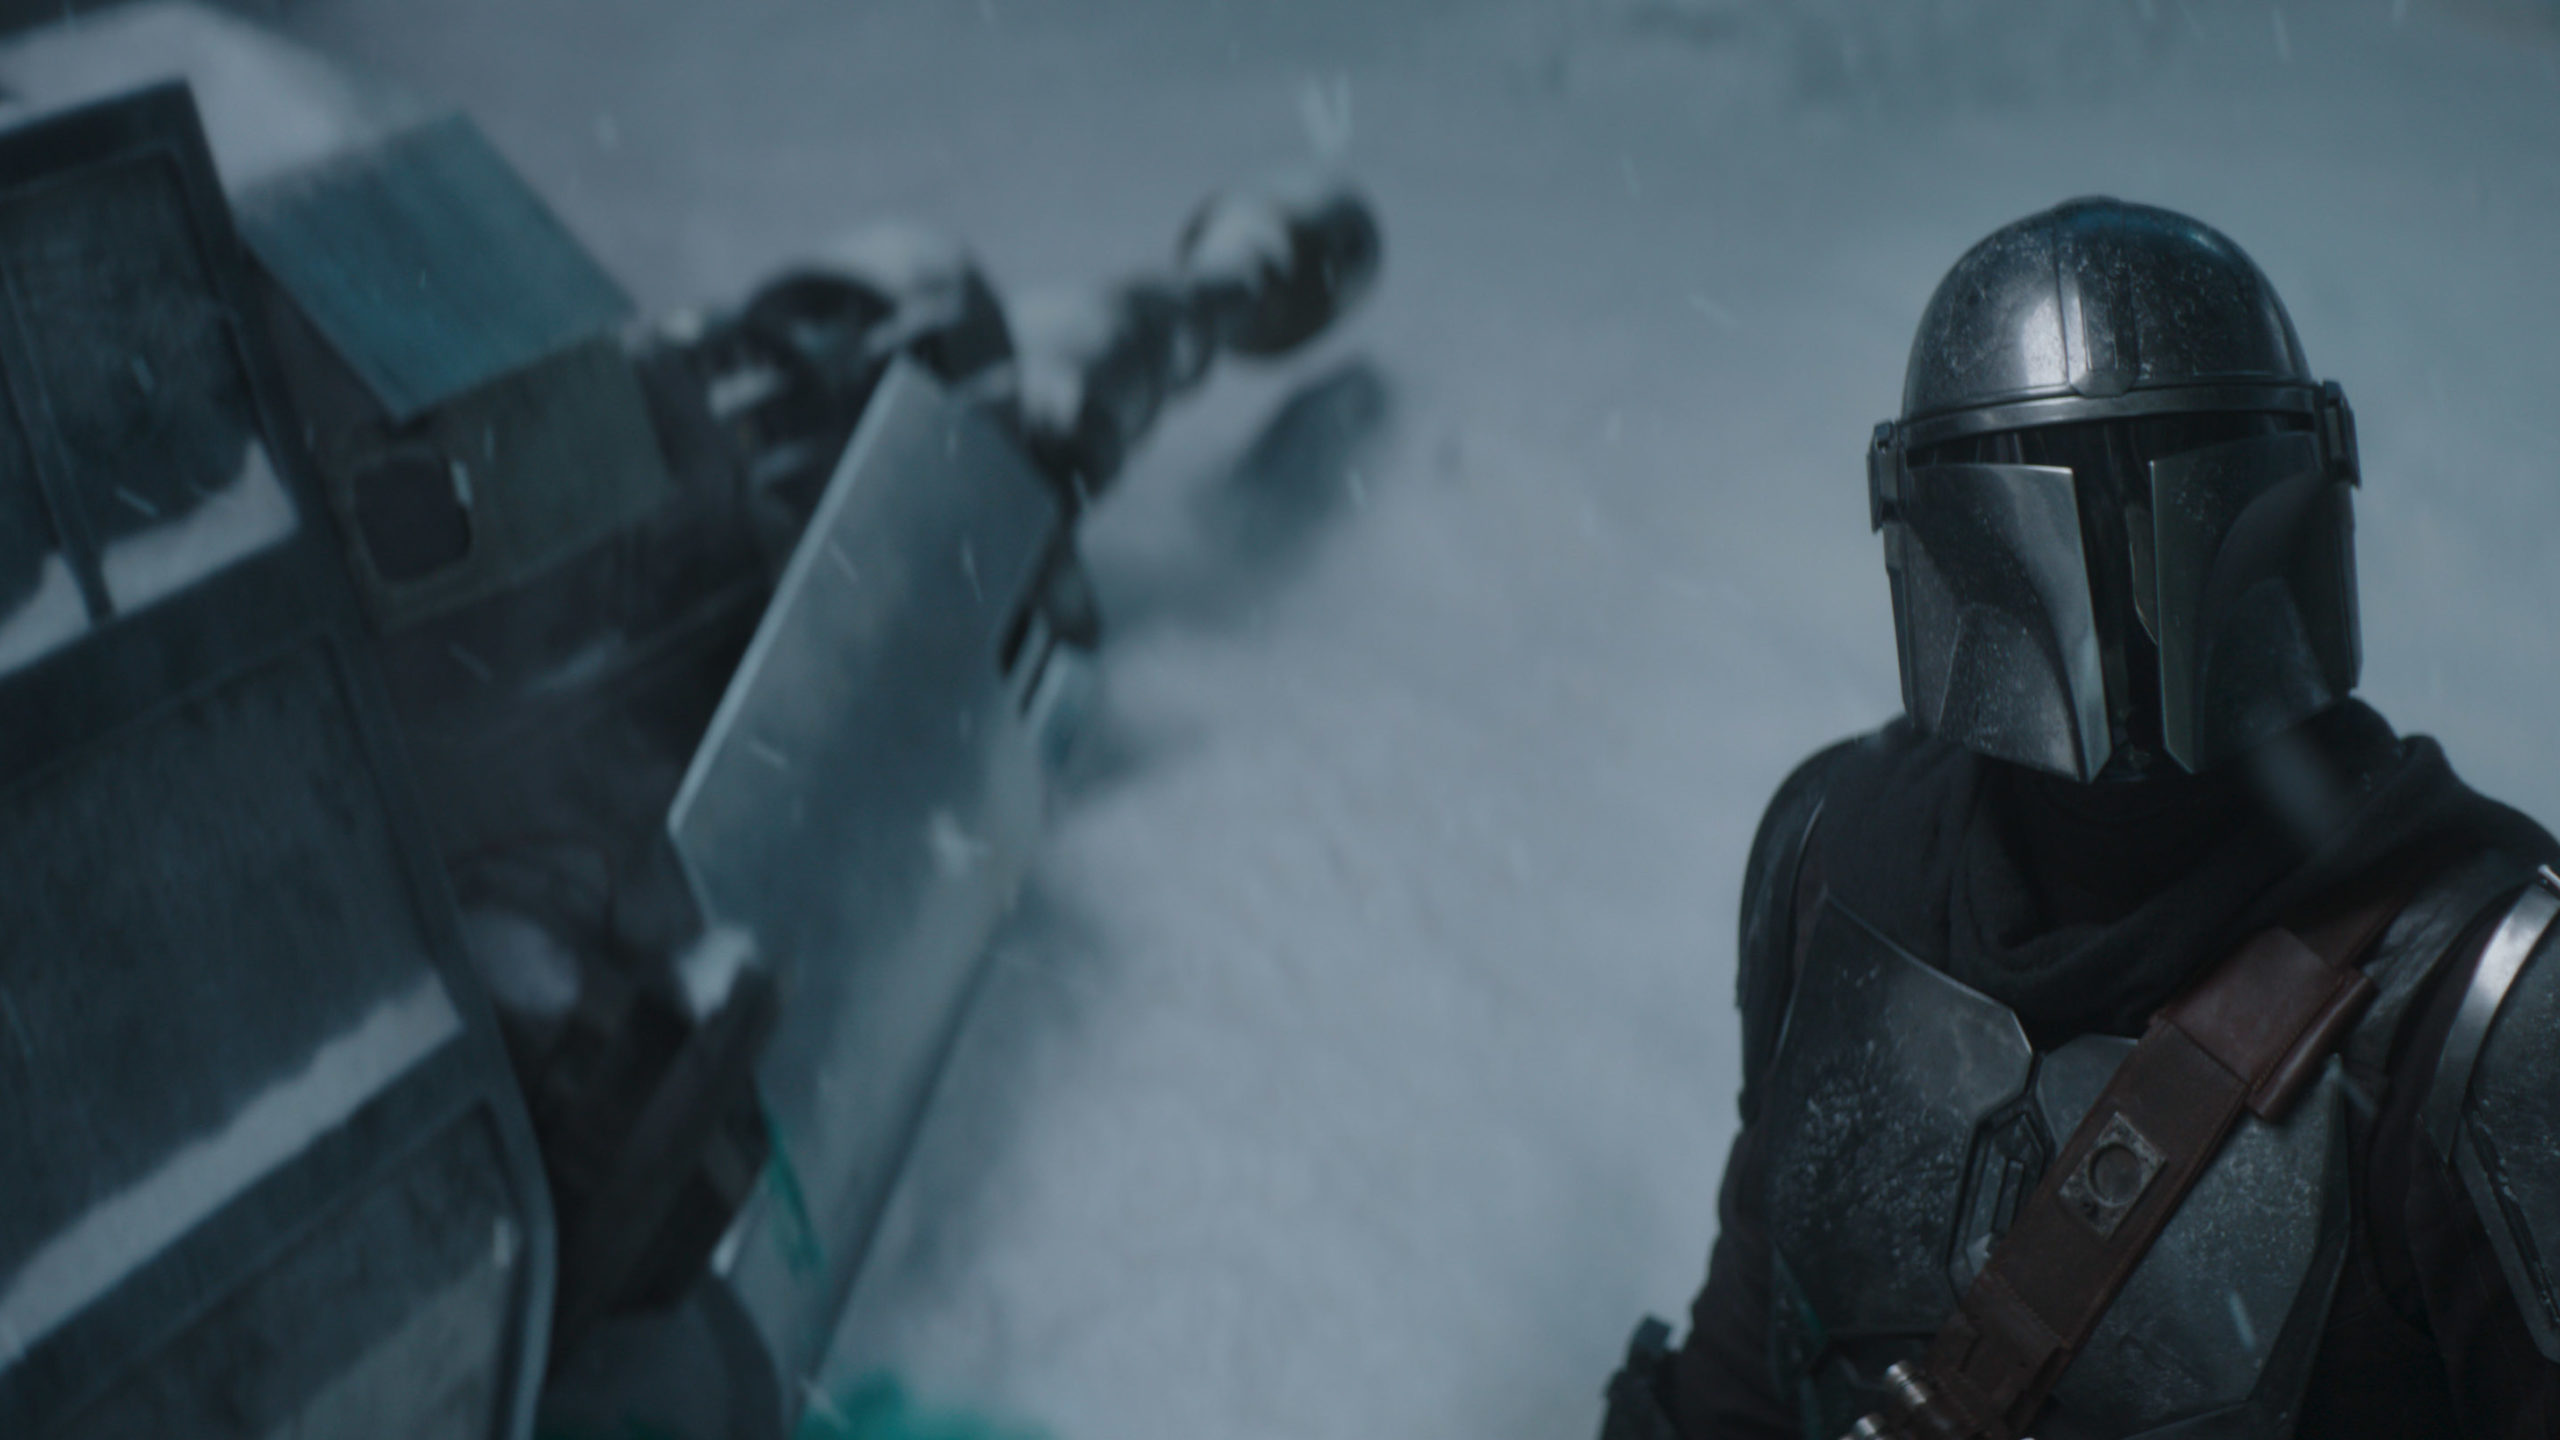 The Mandalorian Season 2 Episode 6: All about Tython, Release Date and More